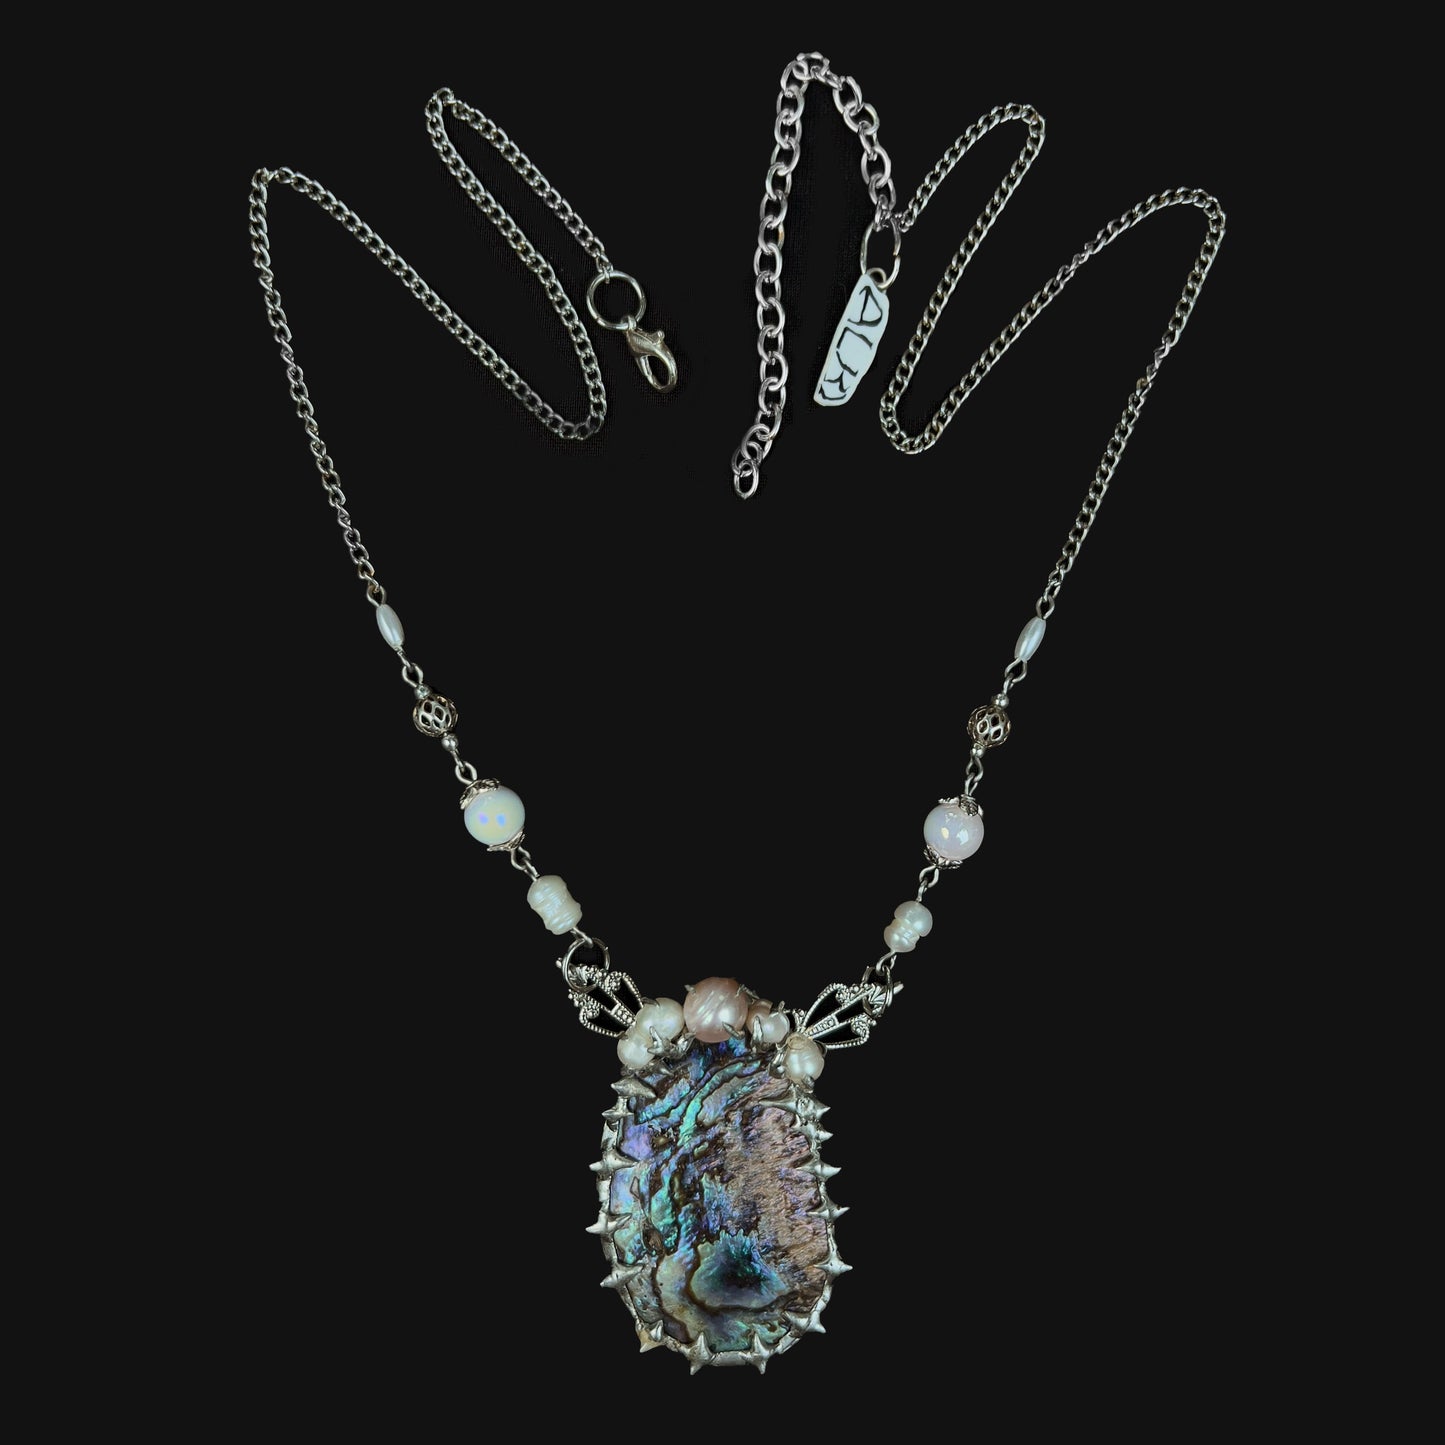 Abalone fairy necklace